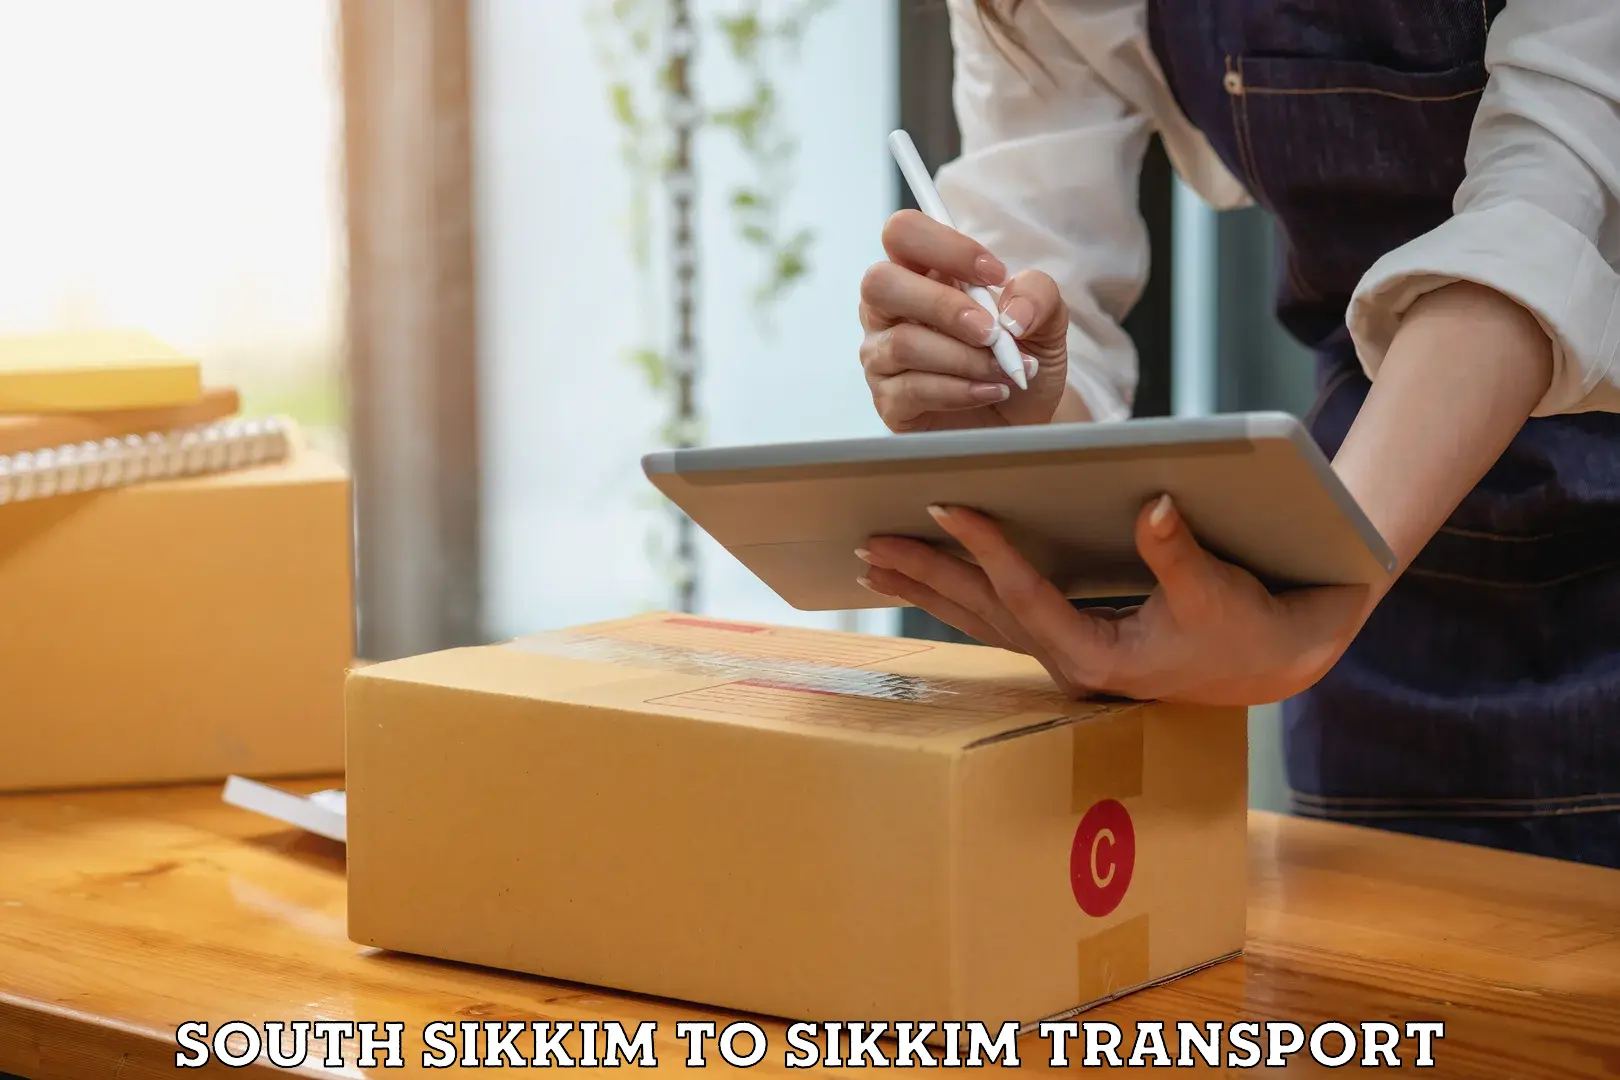 Transport in sharing South Sikkim to Sikkim